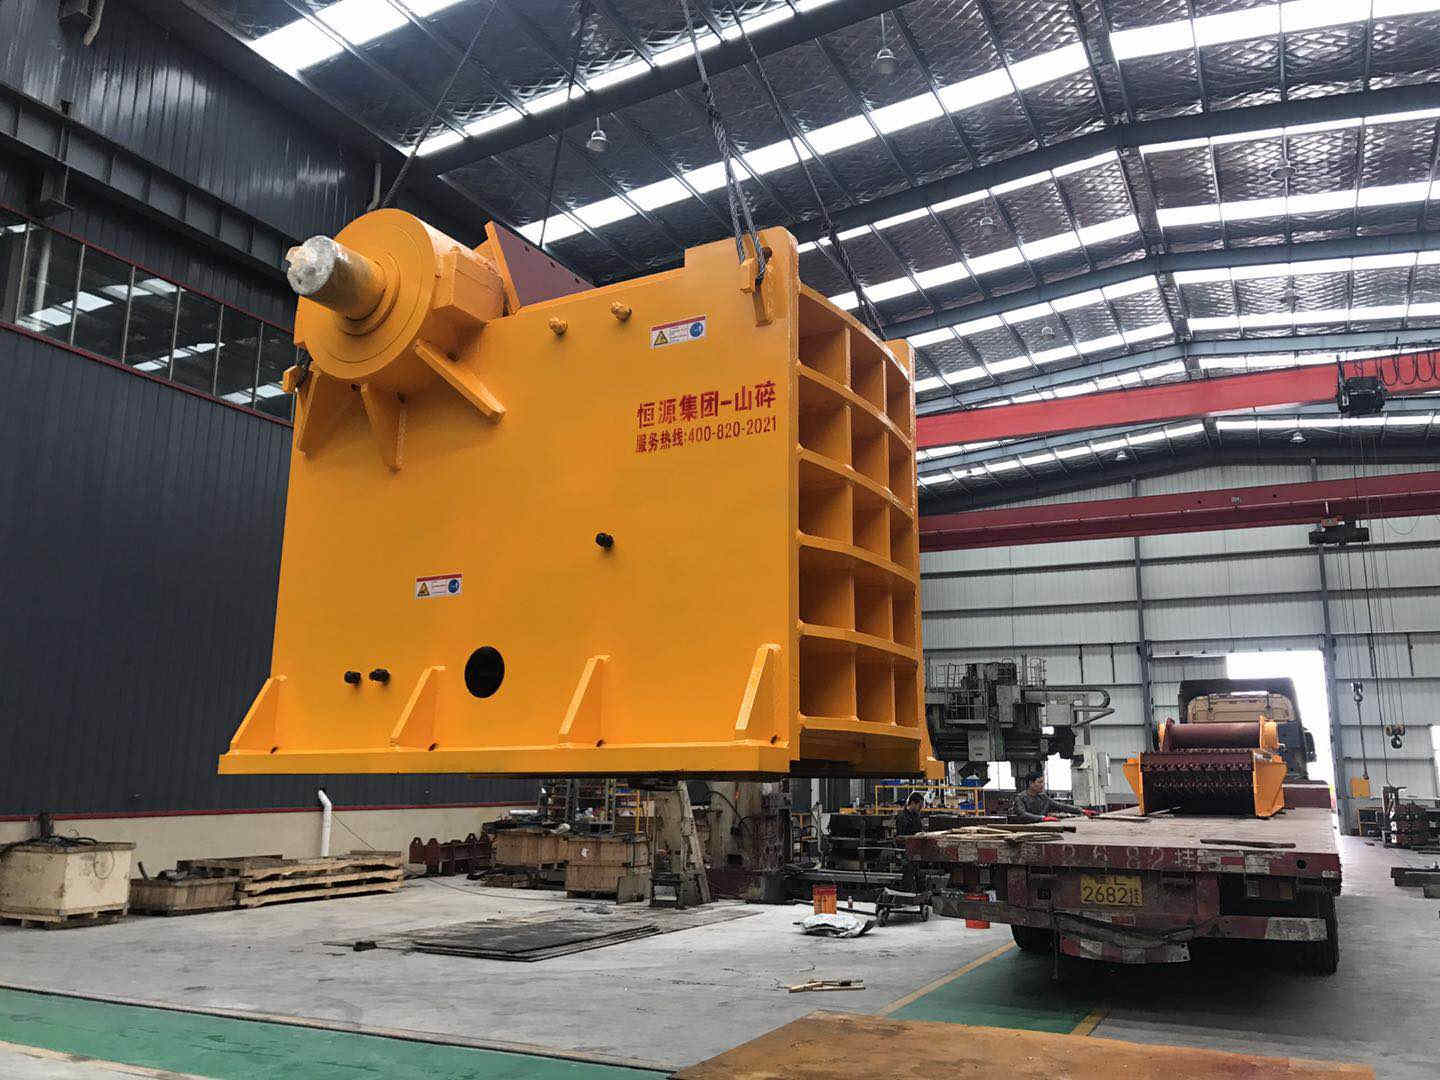 Shanghai Hengyuan crusher delivery live 2019.04.30